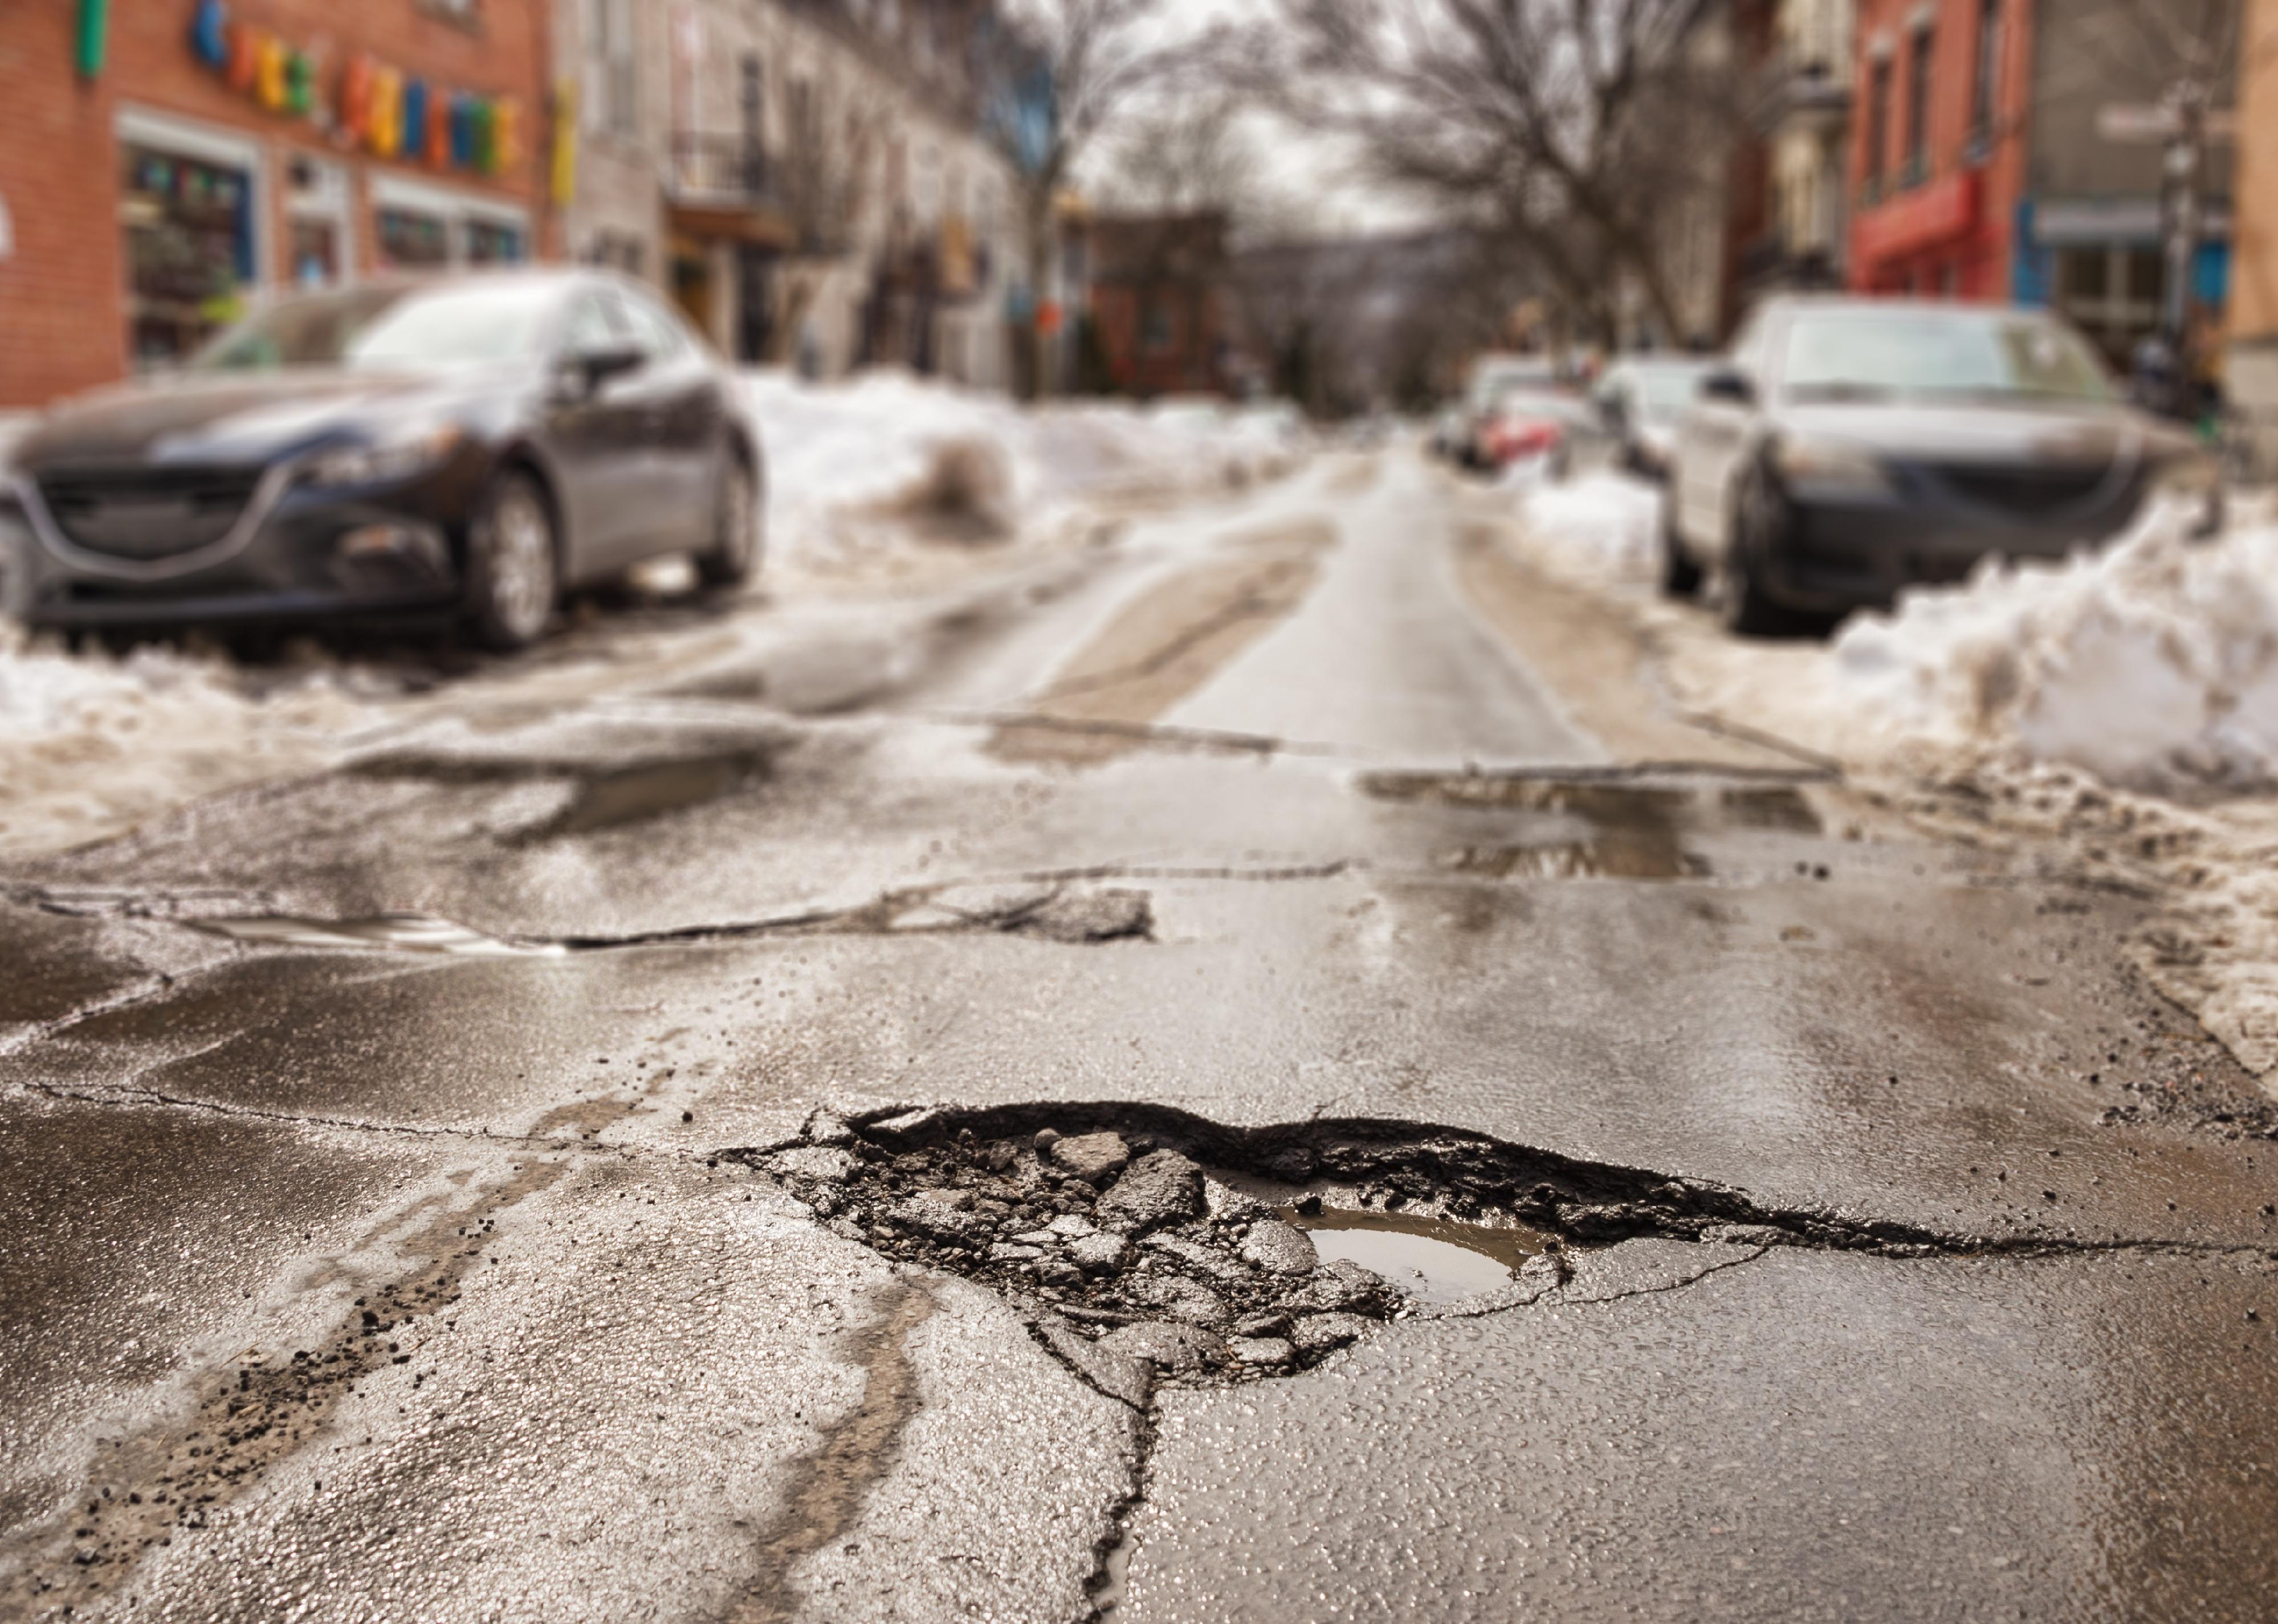 <p>Whether you call it a pothole, as in the Northeastern states; <a href="https://dare.news.wisc.edu/same-thing-different-words-synonyms-by-region/index.html">chughole</a>, as in the South, especially Kentucky; or chuckhole, if you live in California, Nevada, Ohio, Pennsylvania, Indiana or Florida, the headache experienced from driving over one is likely the same. Chuckhole may have been born from "chock," a word used in the 16th century meaning to "<a href="https://www.indystar.com/story/news/history/retroindy/2018/02/01/hoosier-lingo-potholes-chuckholes/1083894001/">give a blow under the chin</a>."</p>